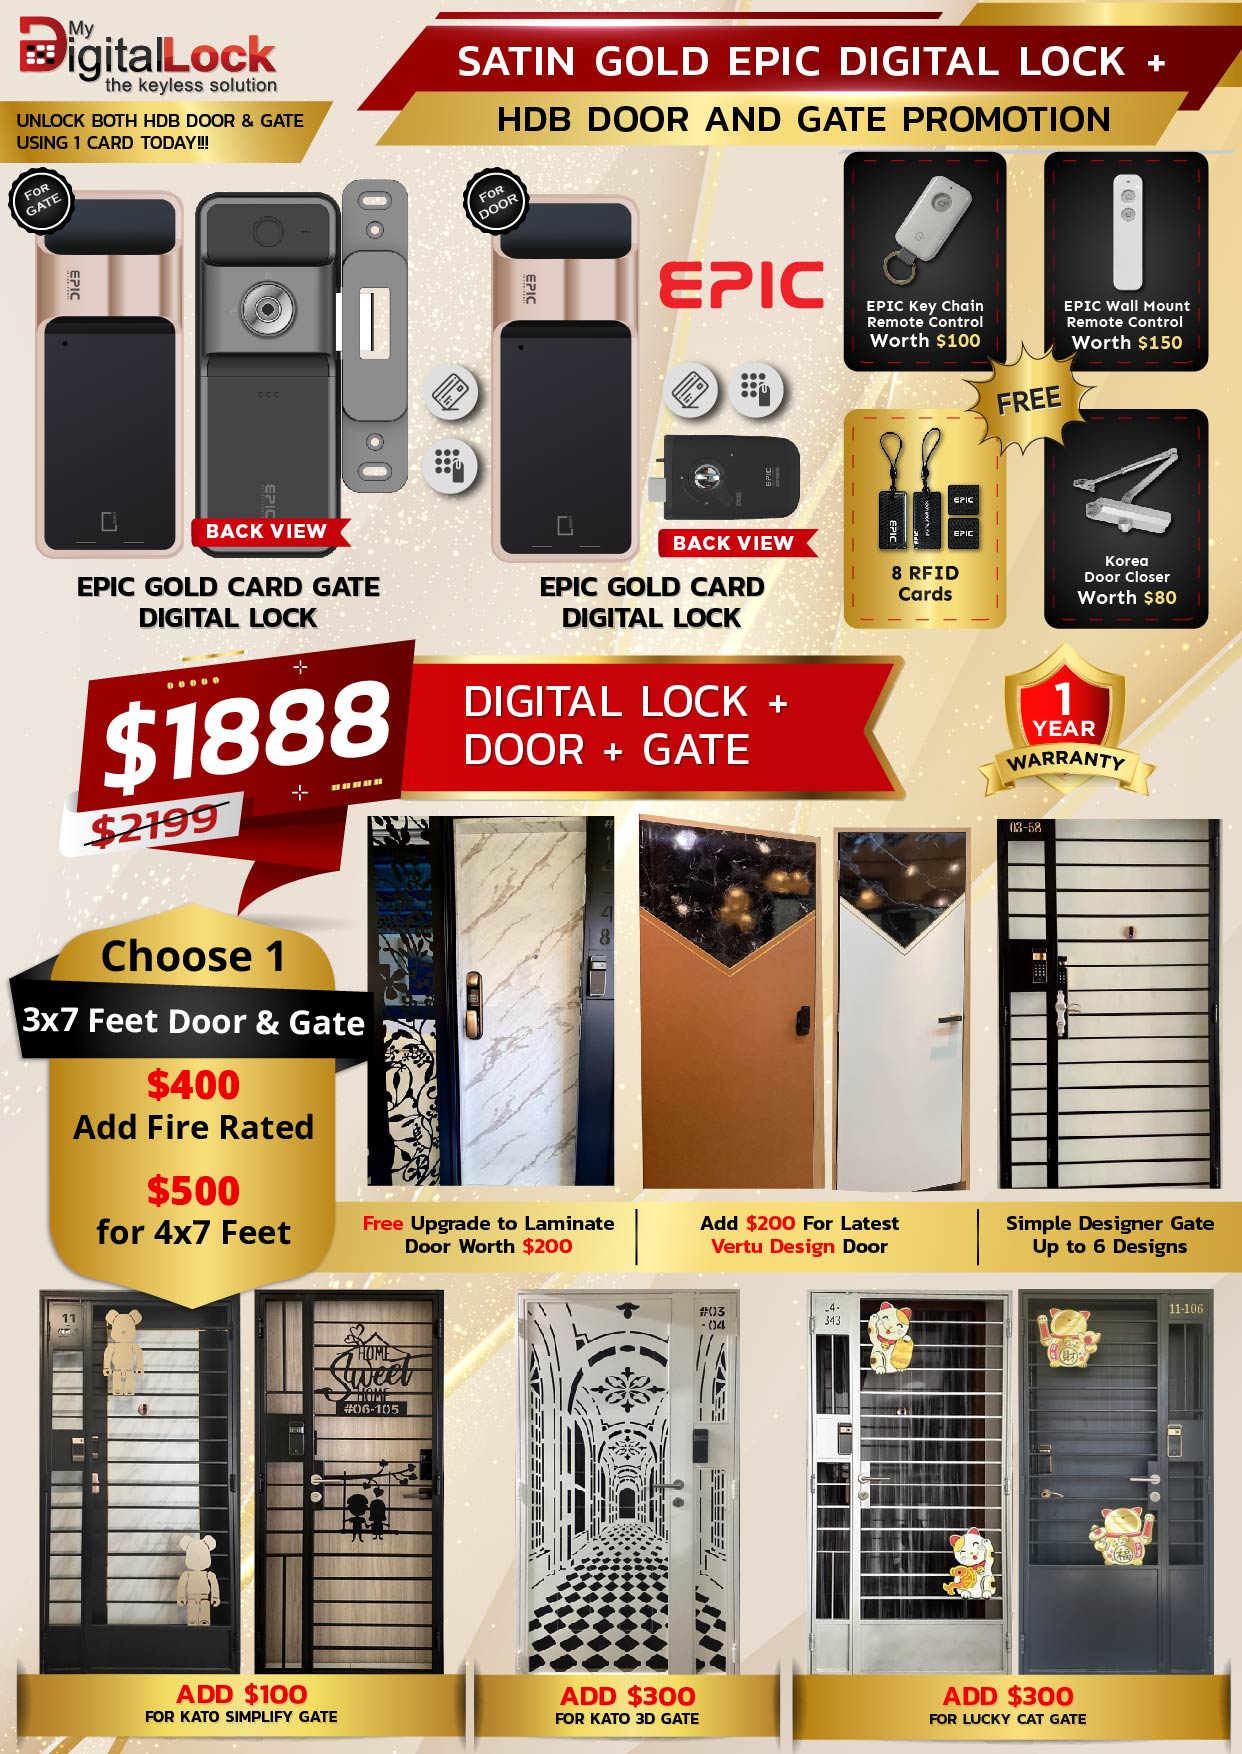 Satin Gold Epic Digital Lock + HDB Door and Gate Promotions